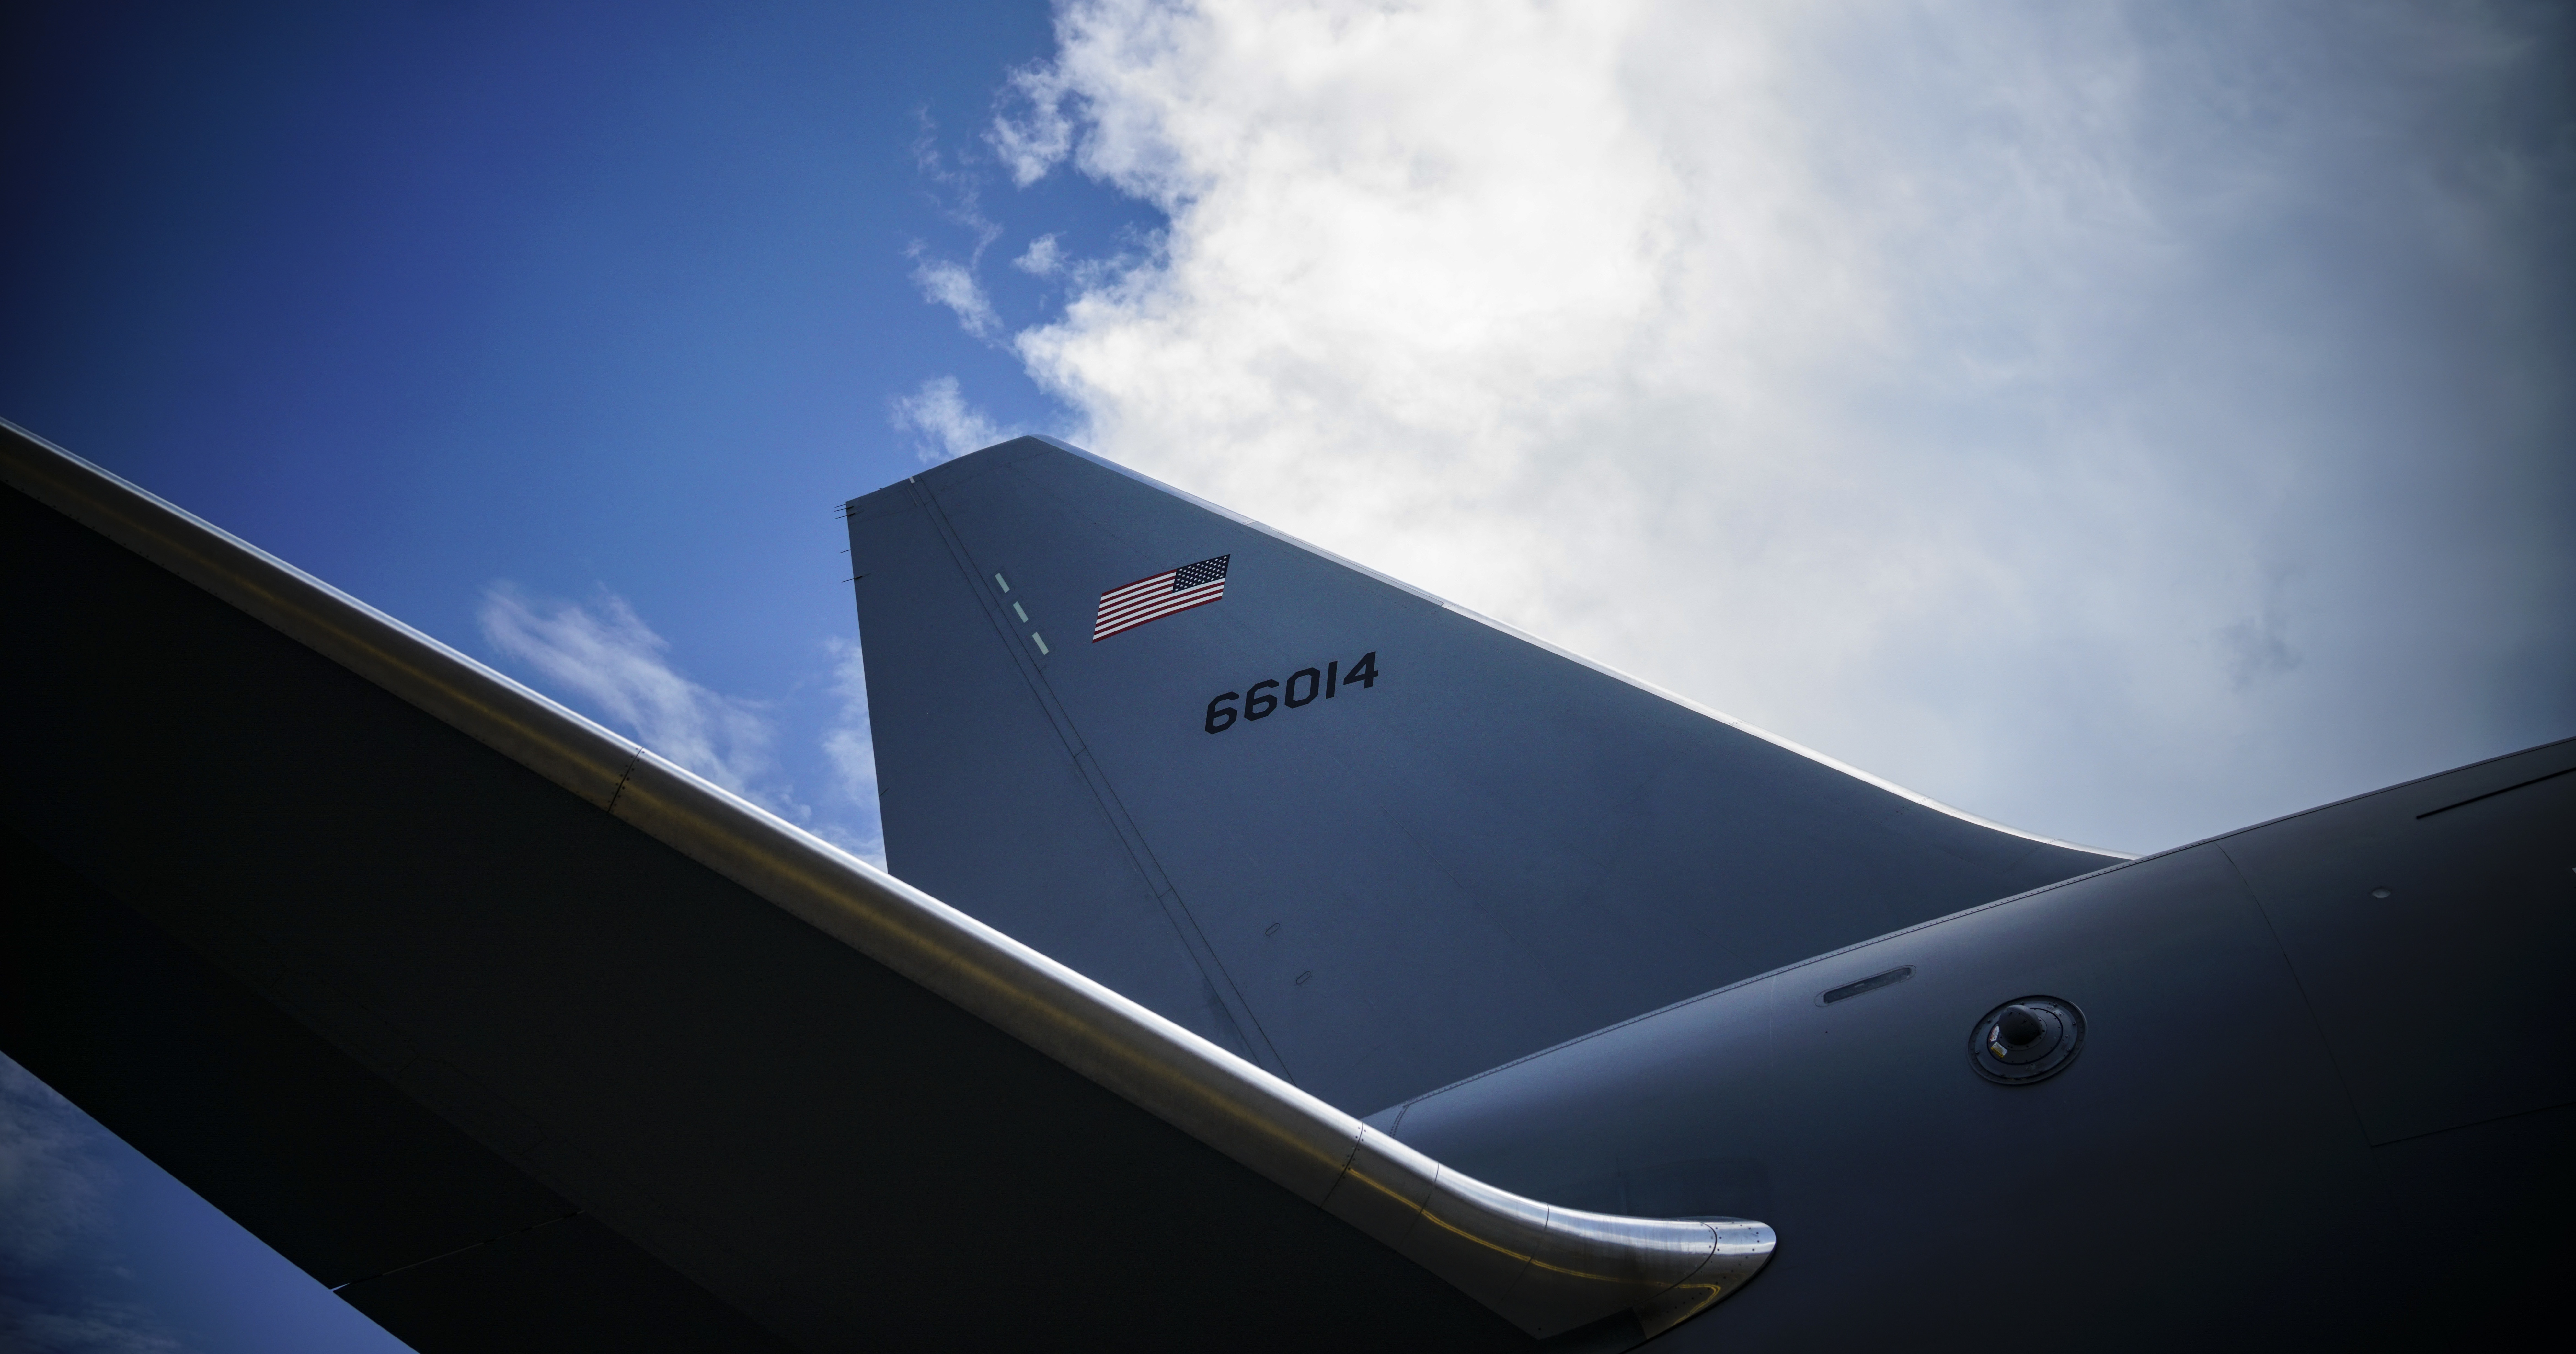 A U.S. Air Force KC-46A Pegasus assigned to the 77th Aerial Refueling Squadron, Seymour Johnson Air Force Base, North Carolina, sits on display during the Singapore Airshow 2022 at the Changi Exhibition Center, Republic of Singapore, Feb. 15, 2021. Participation in the Singapore Airshow 2022 provides the U.S. military the opportunity to improve our already strong ties with Singapore, demonstrate flexible aircraft capability, enable engagement with foreign partners, and expand power projection capabilities. (U.S. Air Force photo by Master Sgt. Richard P. Ebensberger)